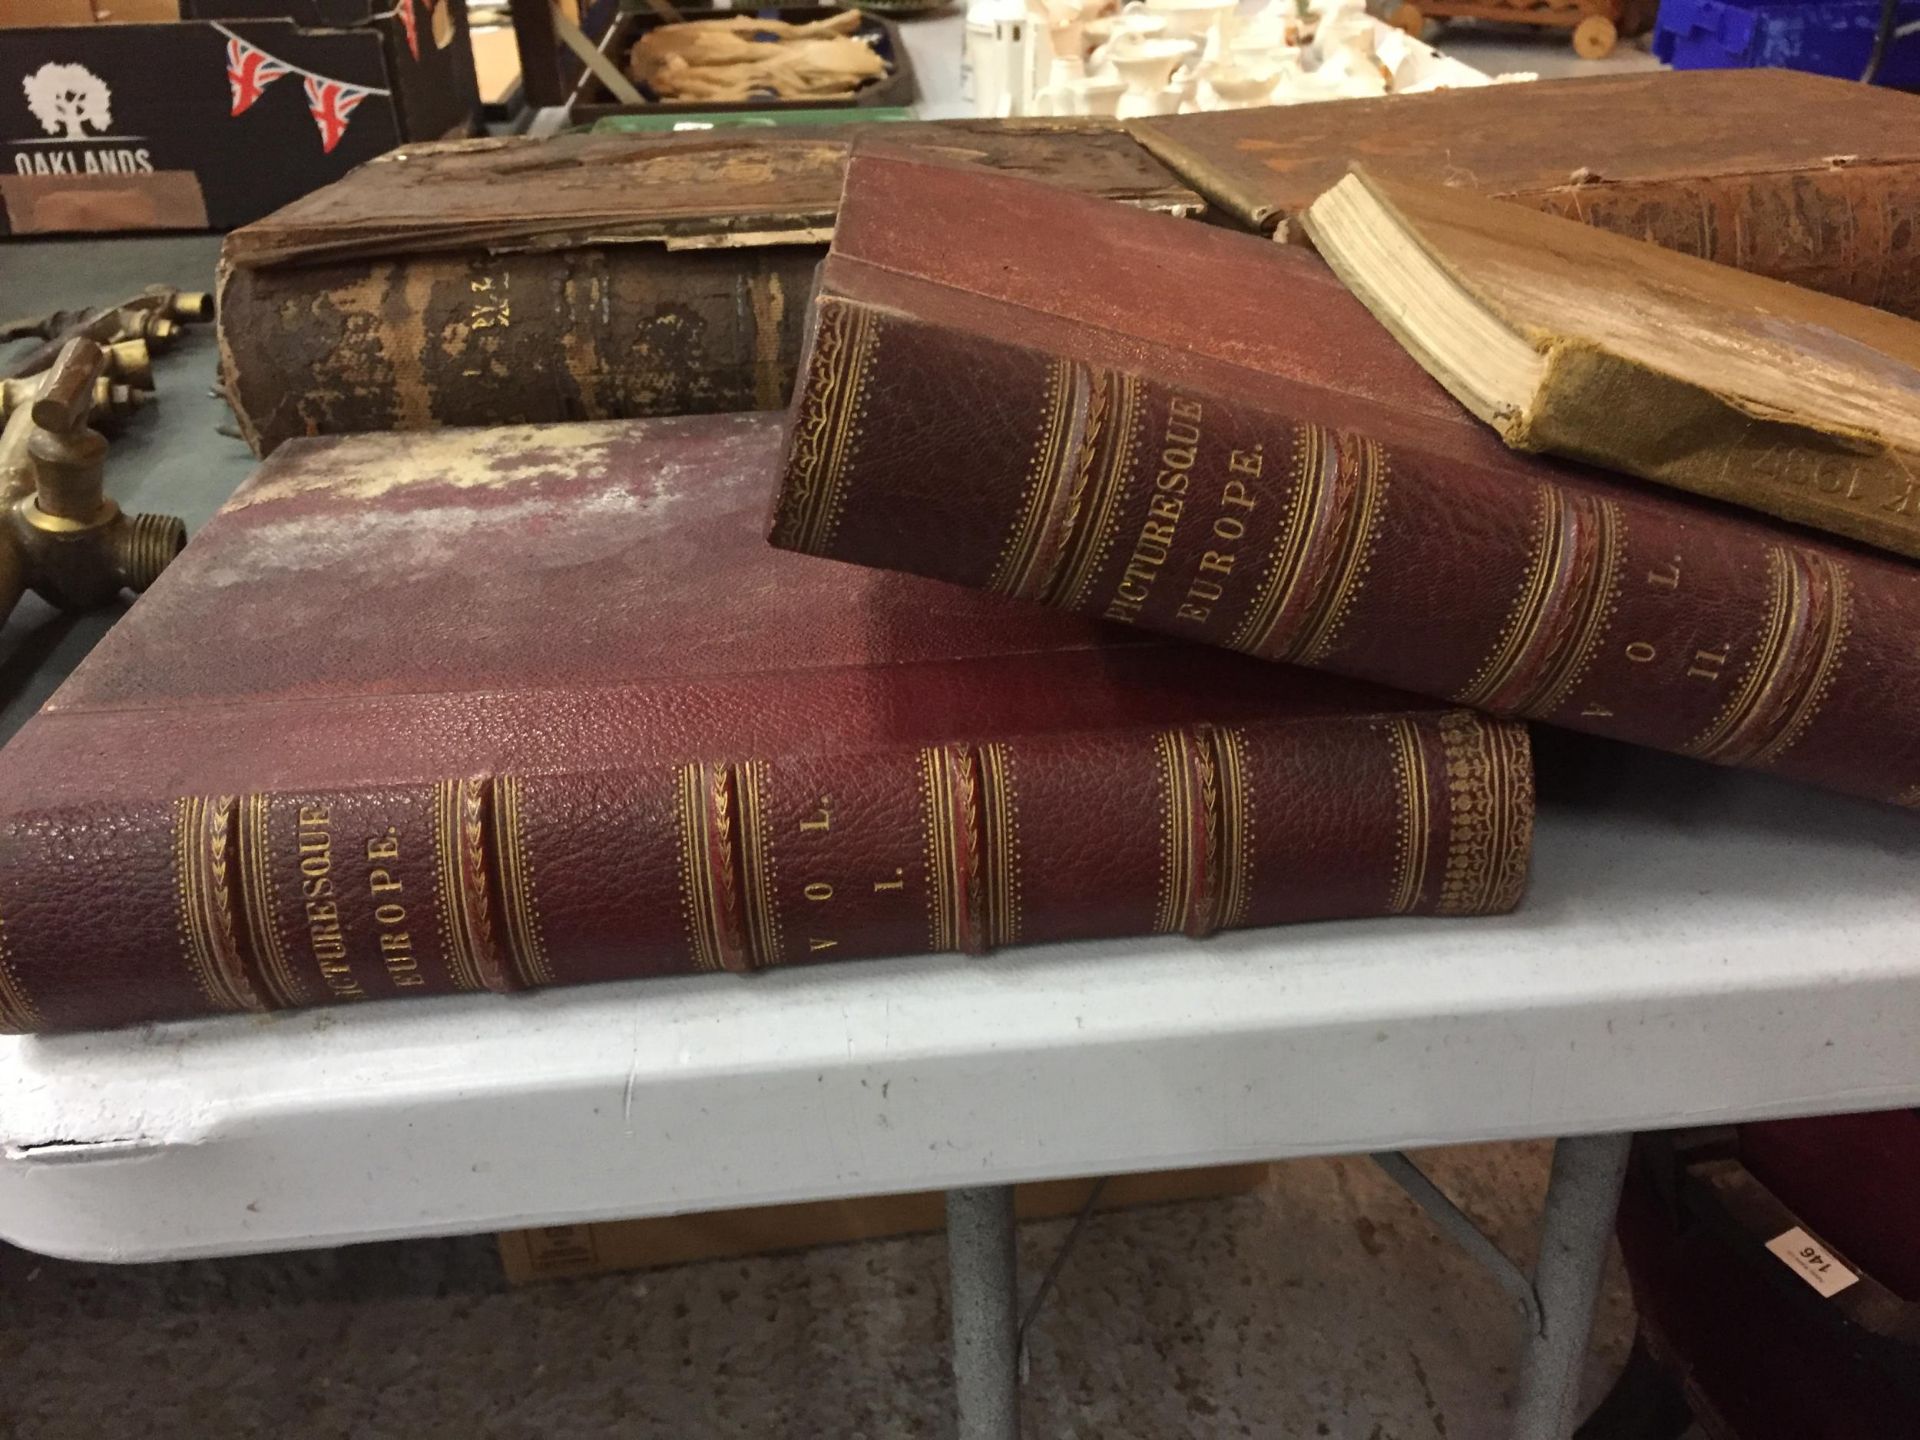 A COLLECTION OF FIVE BOOKS TO INCLUDE TWO LARGE BRASS BOUND OLD LEATHER BIBLES, VOLUMES 1 & 2 OF - Image 5 of 5